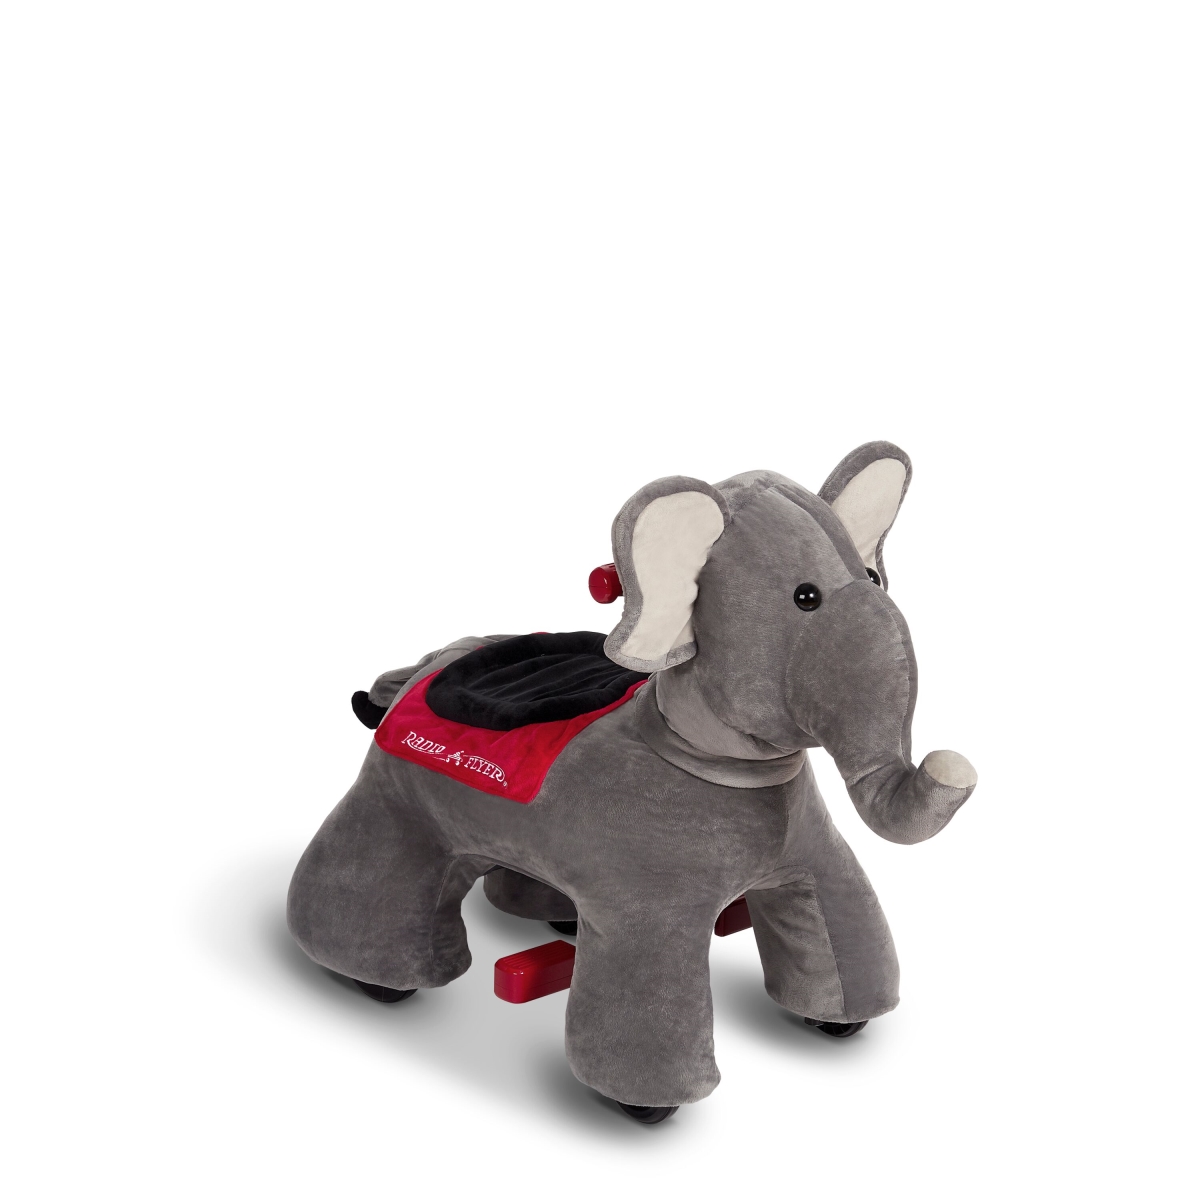 987z Peanut - Electric Ride On Elephant With Sounds